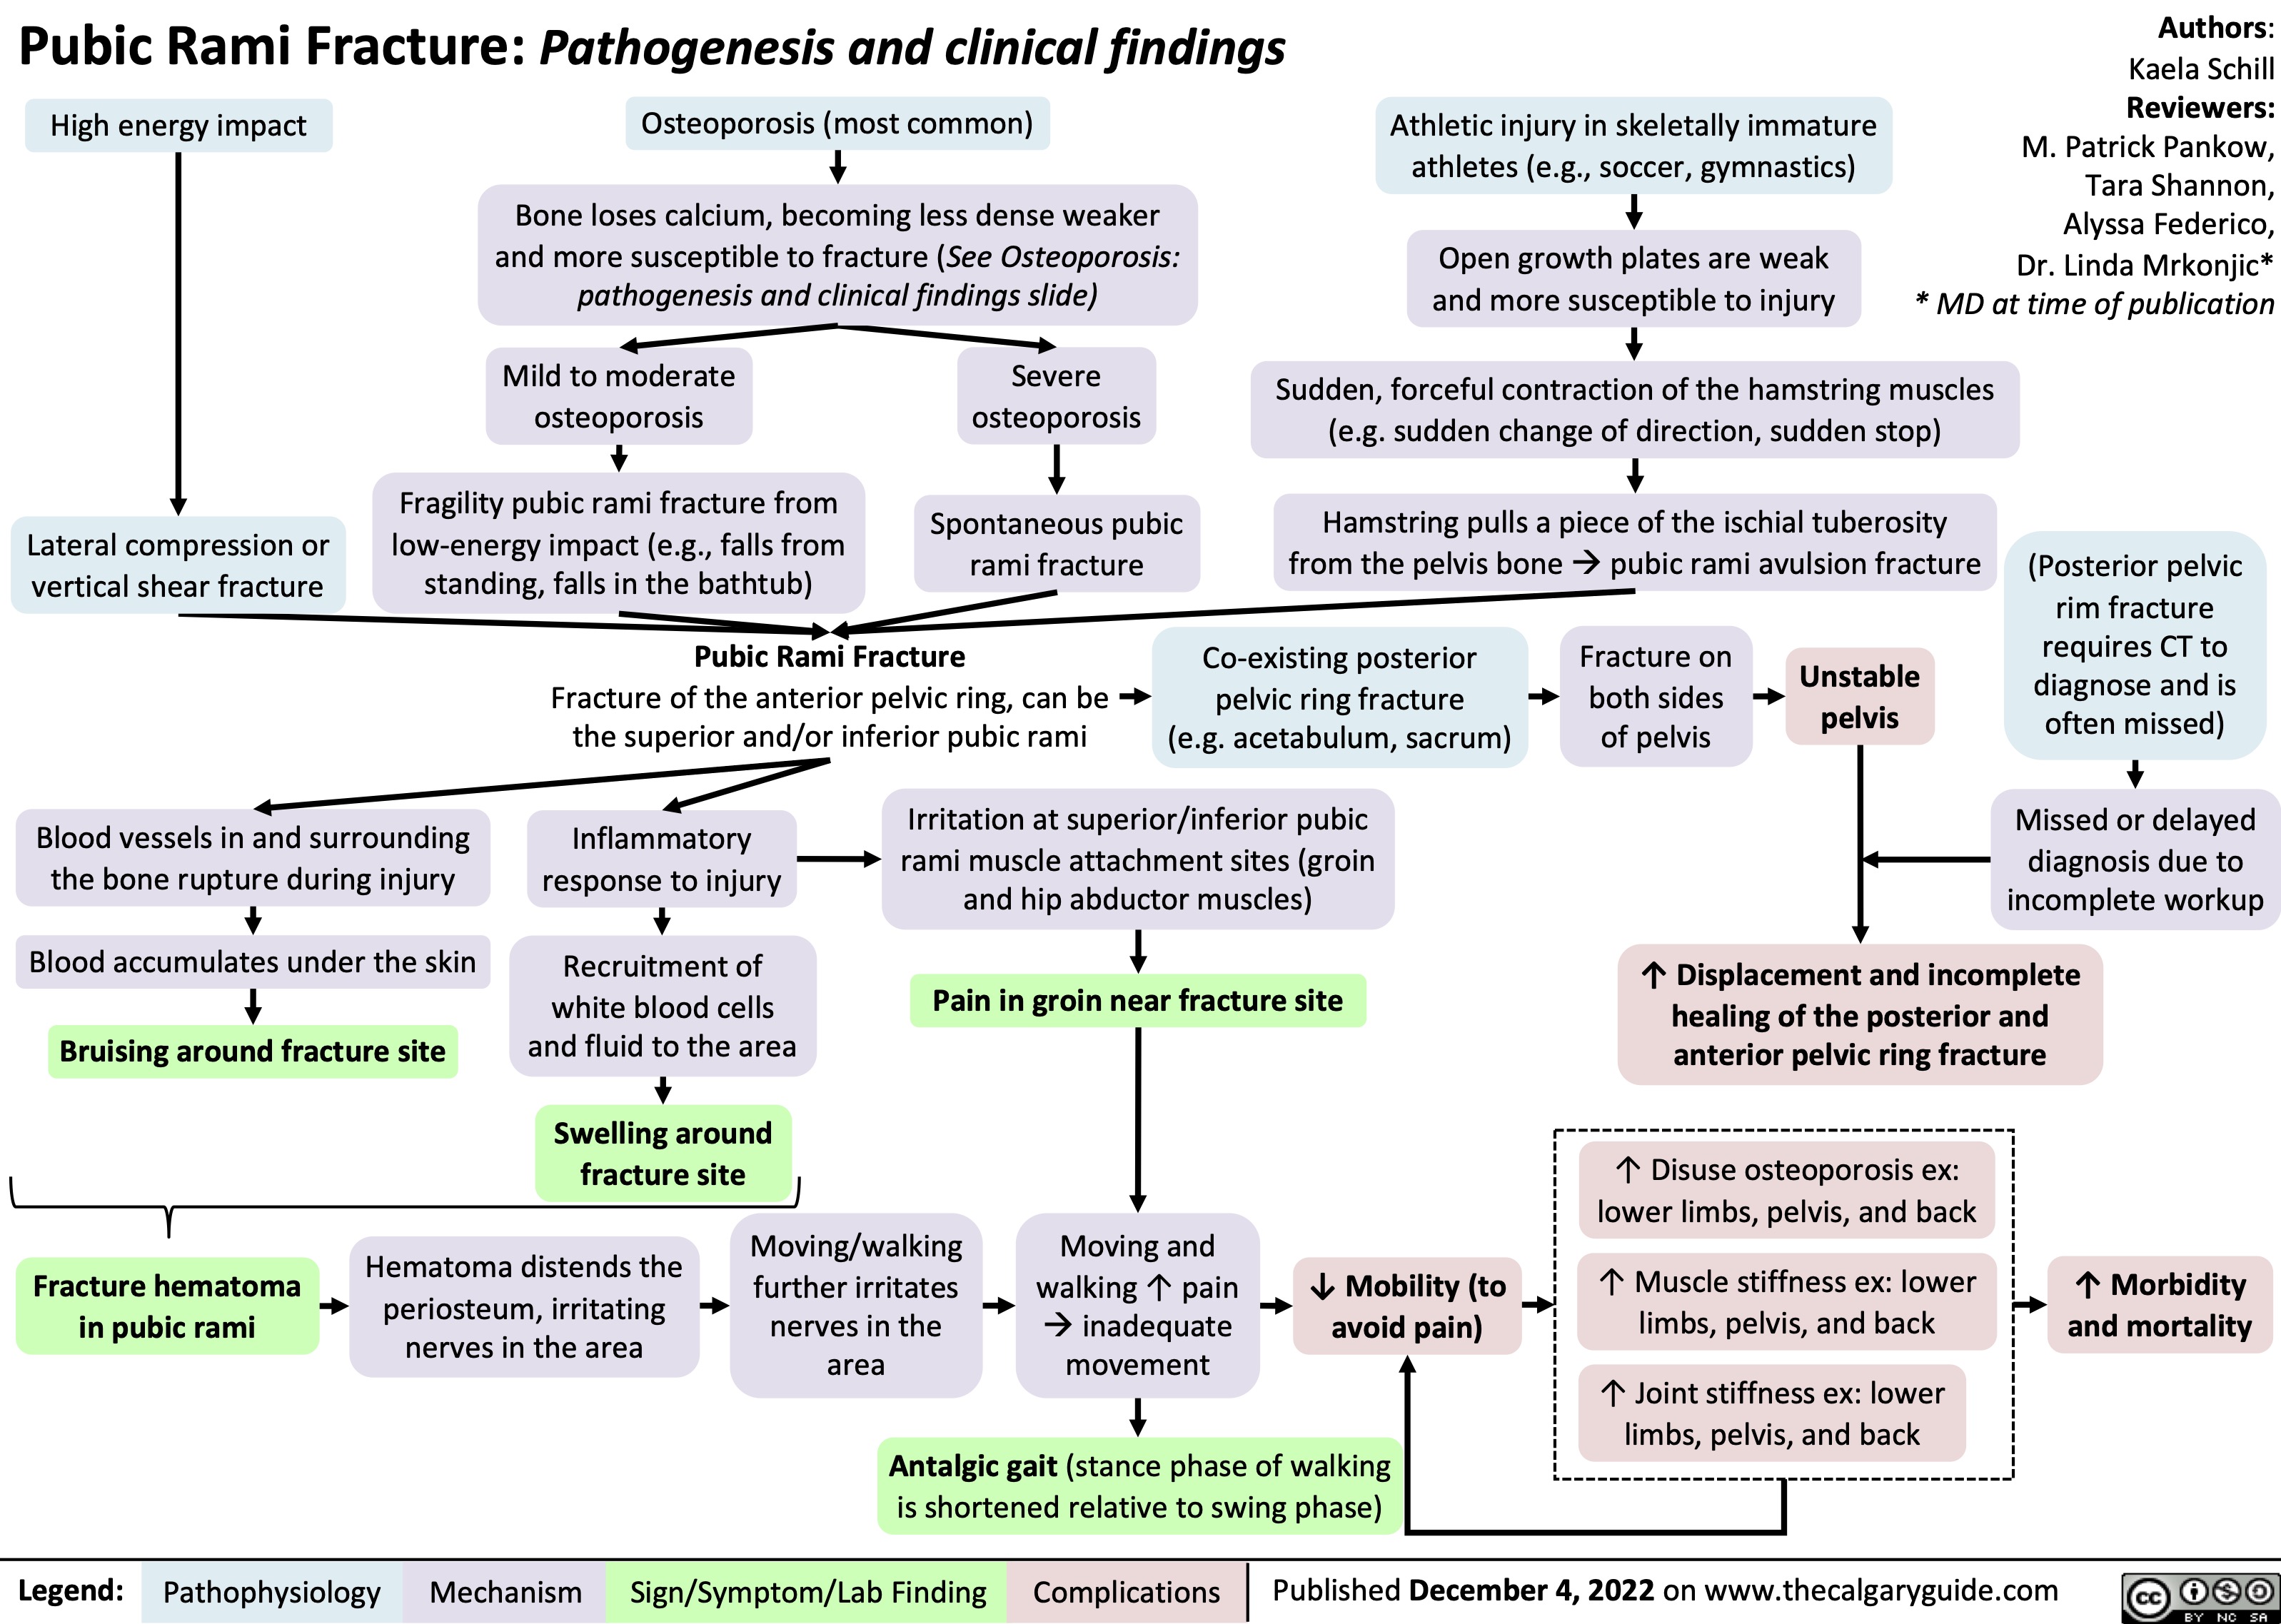 Pubic Rami Fracture: Pathogenesis and clinical findings
Authors: Kaela Schill Reviewers:
M. Patrick Pankow, Tara Shannon, Alyssa Federico, Dr. Linda Mrkonjic* * MD at time of publication
   High energy impact
Osteoporosis (most common)
Bone loses calcium, becoming less dense weaker and more susceptible to fracture (See Osteoporosis: pathogenesis and clinical findings slide)
Athletic injury in skeletally immature athletes (e.g., soccer, gymnastics)
Open growth plates are weak and more susceptible to injury
            Lateral compression or vertical shear fracture
Mild to moderate osteoporosis
Fragility pubic rami fracture from low-energy impact (e.g., falls from standing, falls in the bathtub)
Severe osteoporosis
Spontaneous pubic rami fracture
Sudden, forceful contraction of the hamstring muscles (e.g. sudden change of direction, sudden stop)
Hamstring pulls a piece of the ischial tuberosity from the pelvis boneàpubic rami avulsion fracture
(Posterior pelvic rim fracture
requires CT to diagnose and is often missed)
Missed or delayed diagnosis due to incomplete workup
       Pubic Rami Fracture
Fracture of the anterior pelvic ring, can be the superior and/or inferior pubic rami
Co-existing posterior pelvic ring fracture (e.g. acetabulum, sacrum)
Fracture on both sides of pelvis
Unstable pelvis
       Blood vessels in and surrounding the bone rupture during injury
Blood accumulates under the skin
Bruising around fracture site
Inflammatory response to injury
Recruitment of white blood cells and fluid to the area
Swelling around fracture site
Irritation at superior/inferior pubic rami muscle attachment sites (groin and hip abductor muscles)
Pain in groin near fracture site
↑ Displacement and incomplete healing of the posterior and anterior pelvic ring fracture
↑ Morbidity and mortality
          ↑ Disuse osteoporosis ex: lower limbs, pelvis, and back
↑ Muscle stiffness ex: lower limbs, pelvis, and back
↑ Joint stiffness ex: lower limbs, pelvis, and back
        Fracture hematoma in pubic rami
Hematoma distends the periosteum, irritating nerves in the area
Moving/walking further irritates nerves in the area
Moving and walking ↑ pain àinadequate movement
↓ Mobility (to avoid pain)
   Antalgic gait (stance phase of walking is shortened relative to swing phase)
 Legend:
 Pathophysiology
 Mechanism
 Sign/Symptom/Lab Finding
 Complications
Published December 4, 2022 on www.thecalgaryguide.com
  